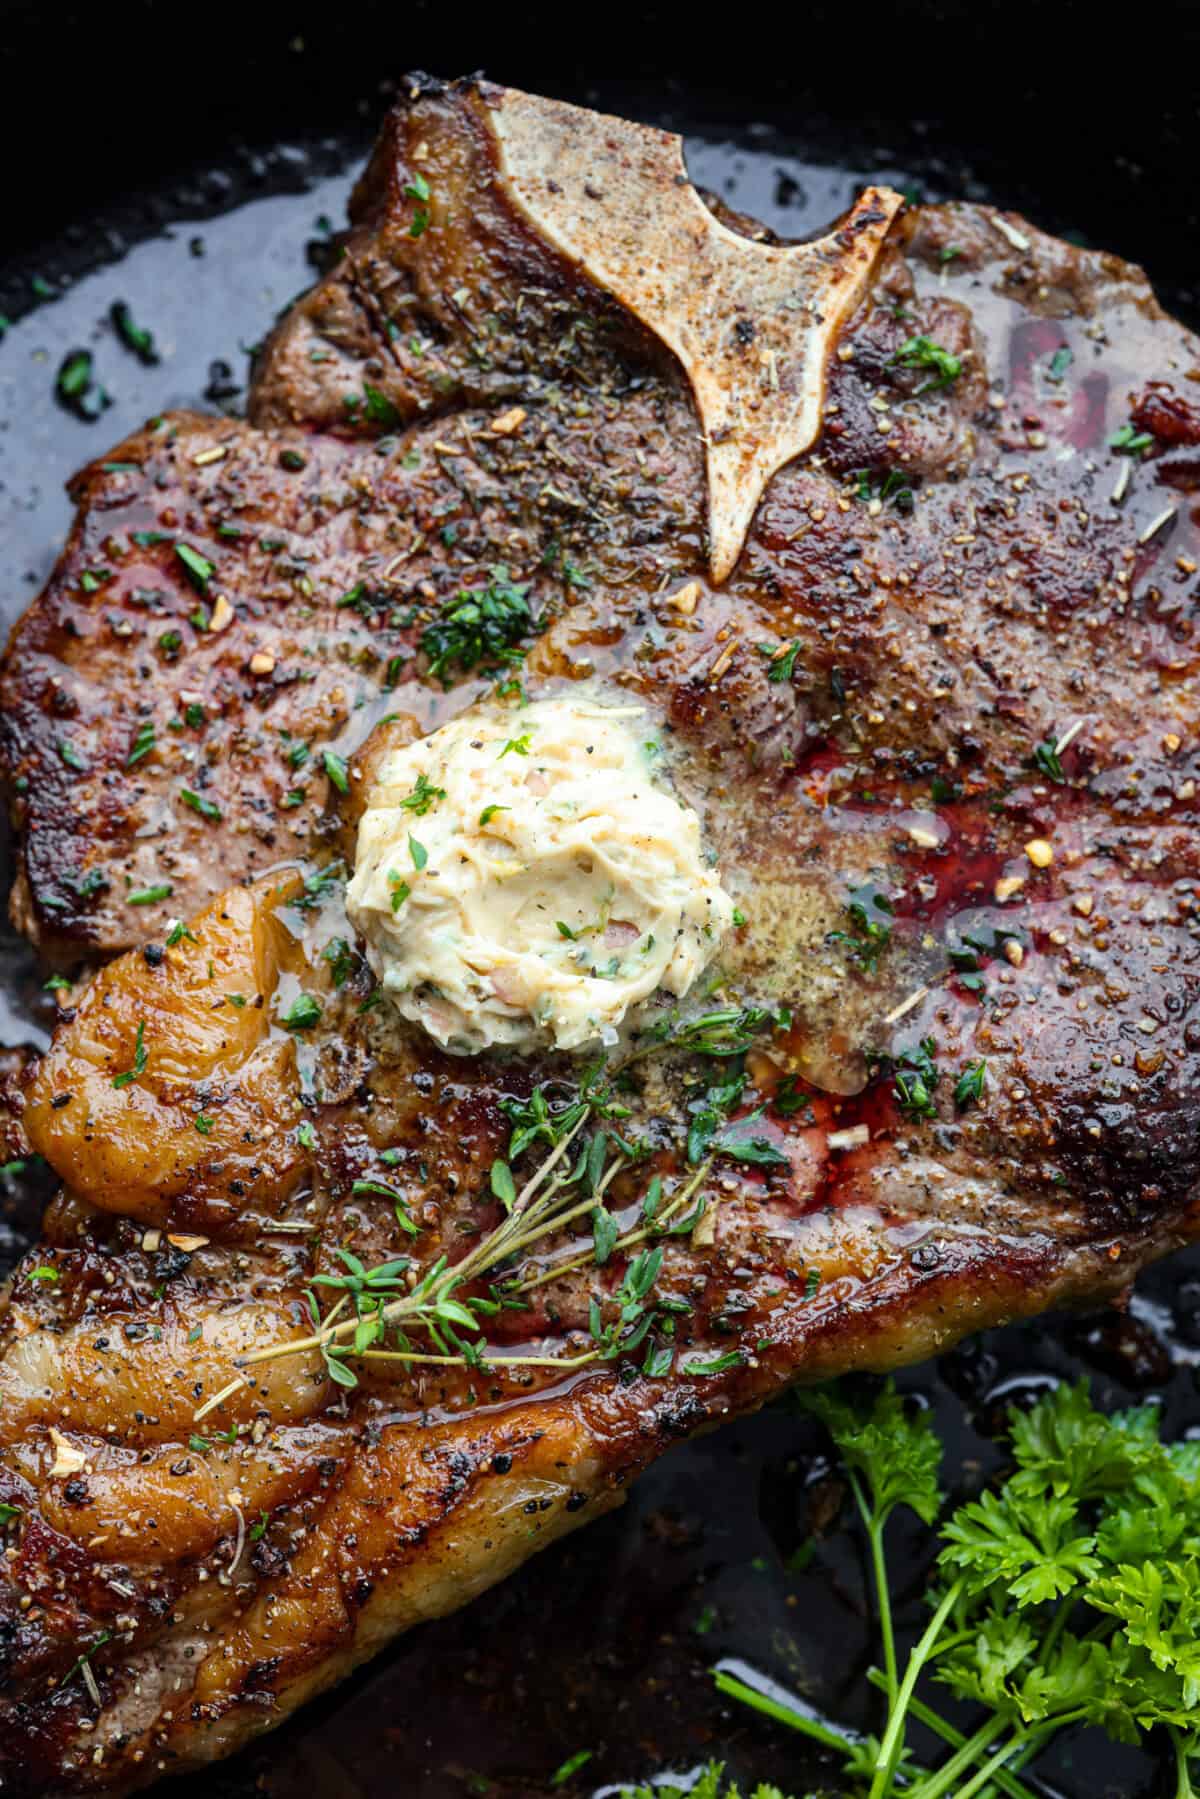 Top-down view of steak topped with butter and herbs.